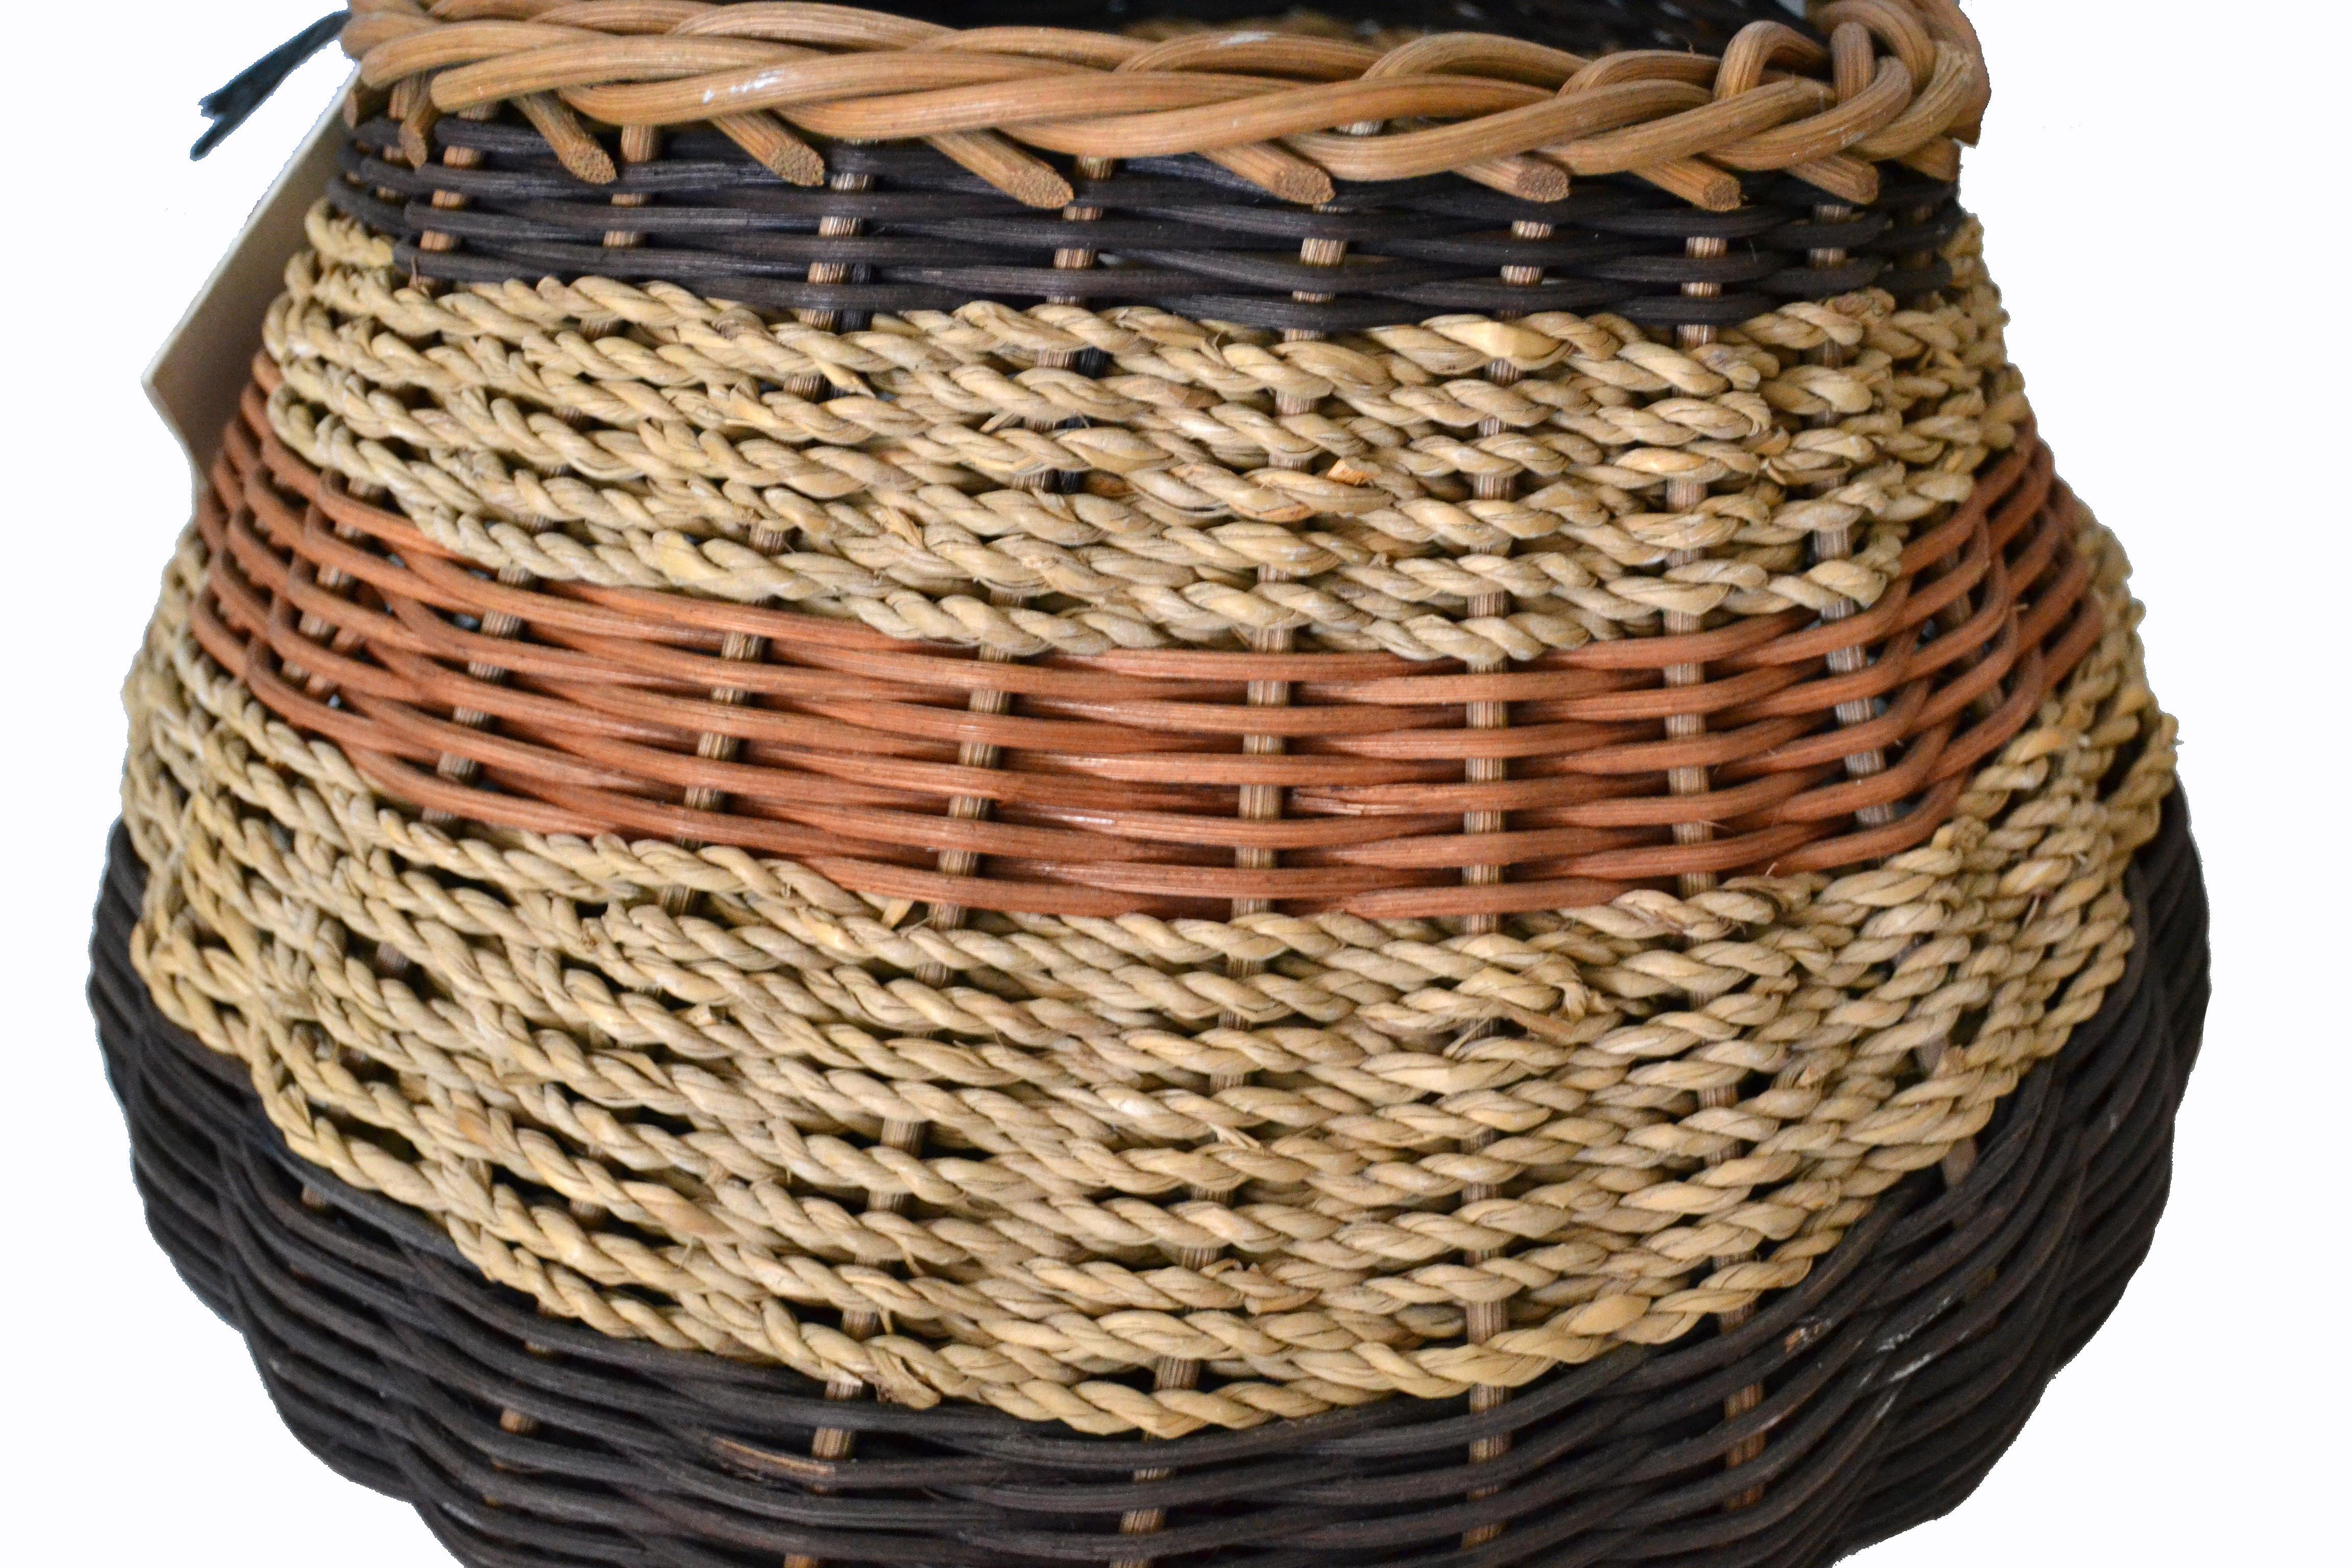 20th Century Boho Chic Handcrafted Woven Reed and Seagrass Nancy Basket by Paulette Lenney  For Sale